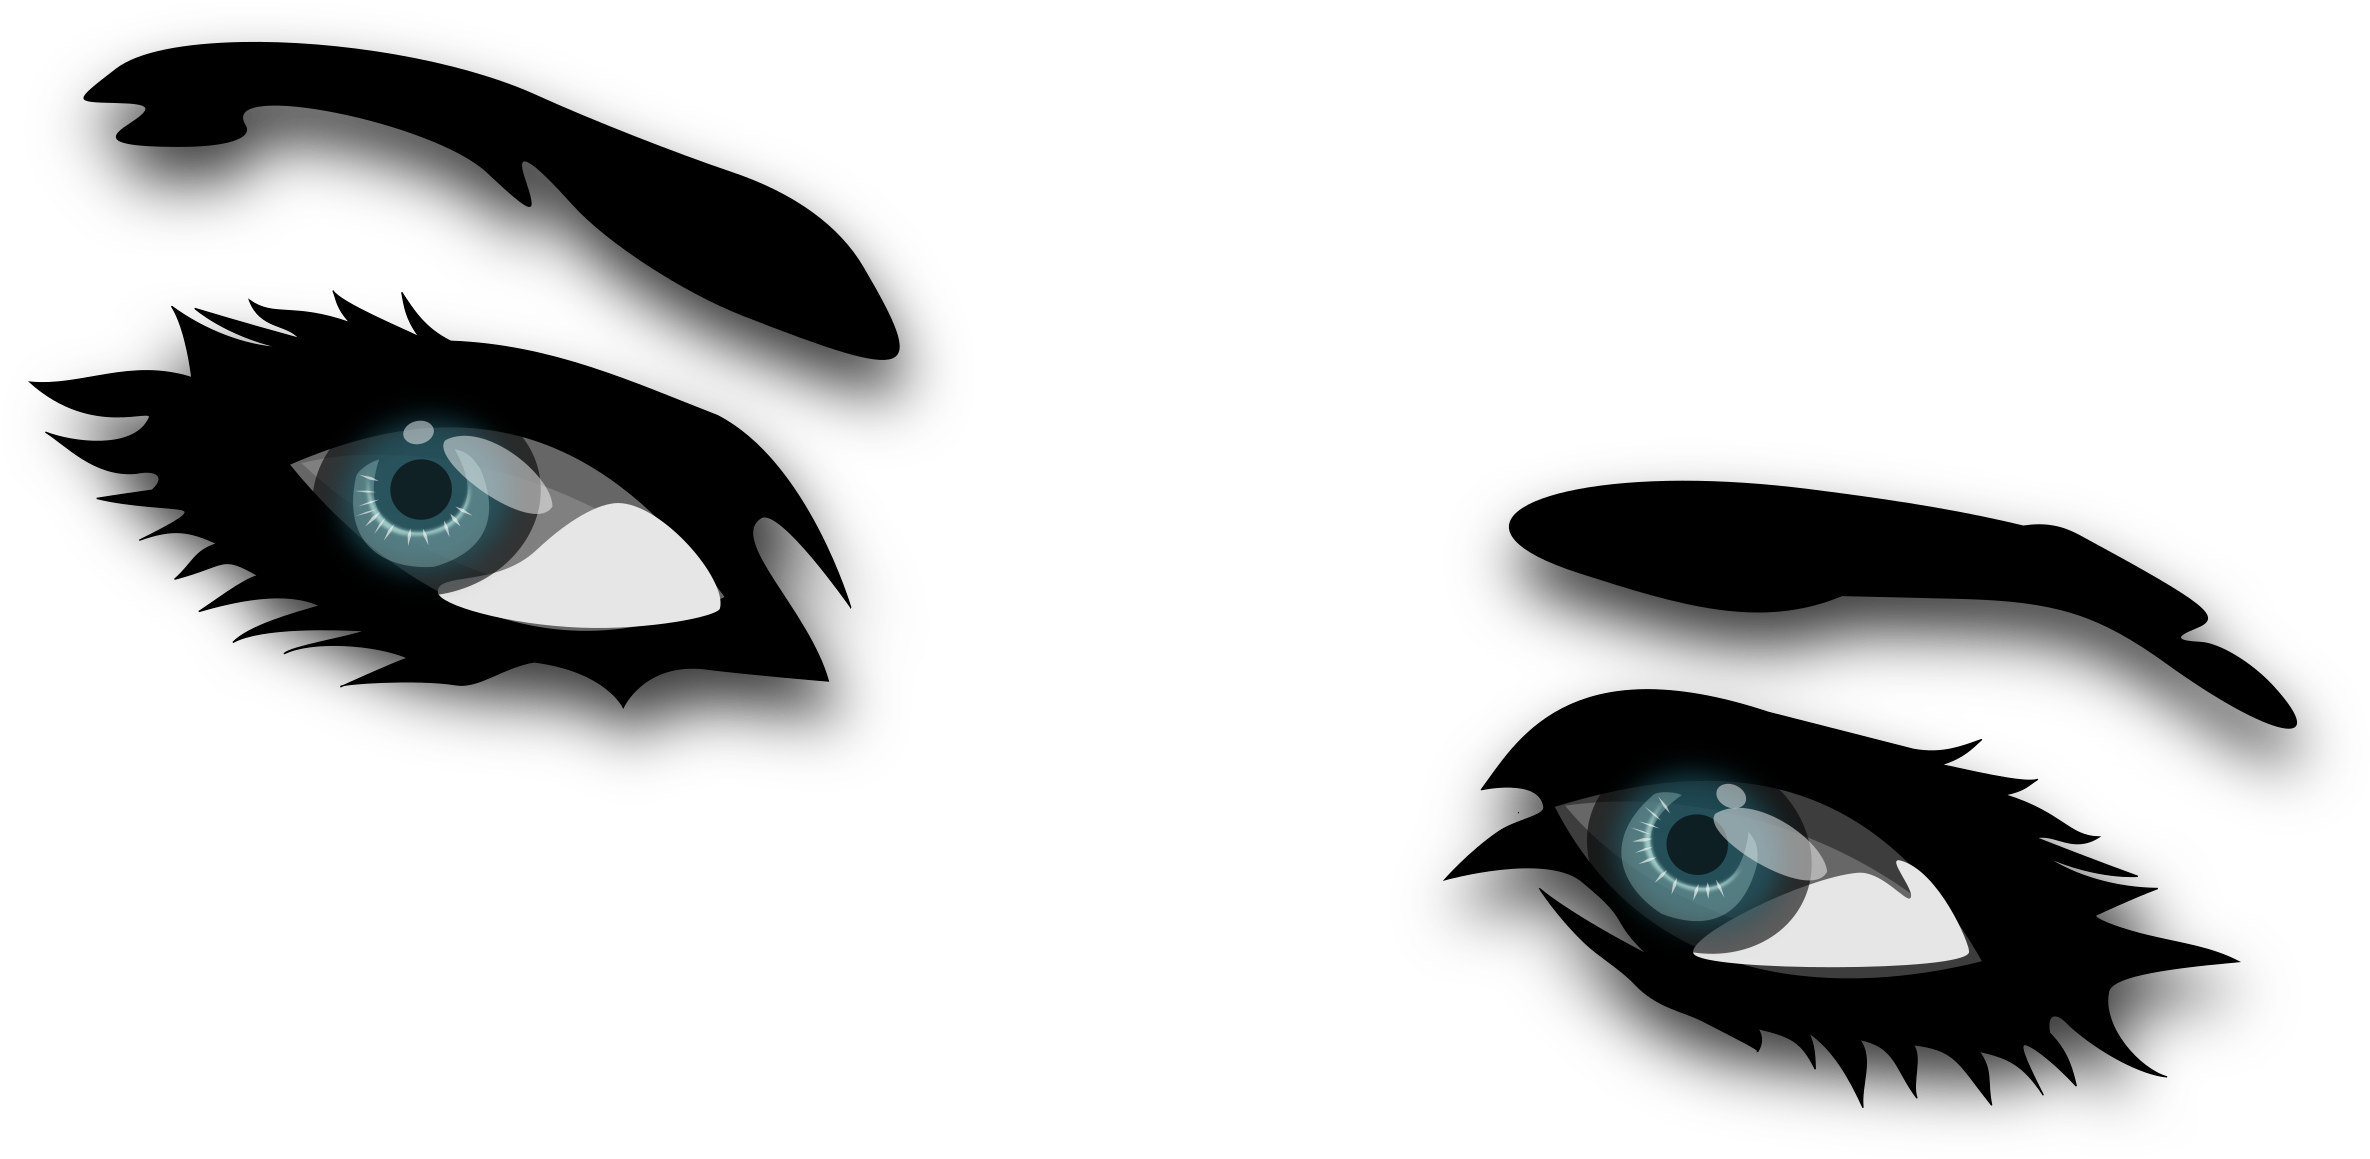 A Pair Of Eyes Looking At Each Other